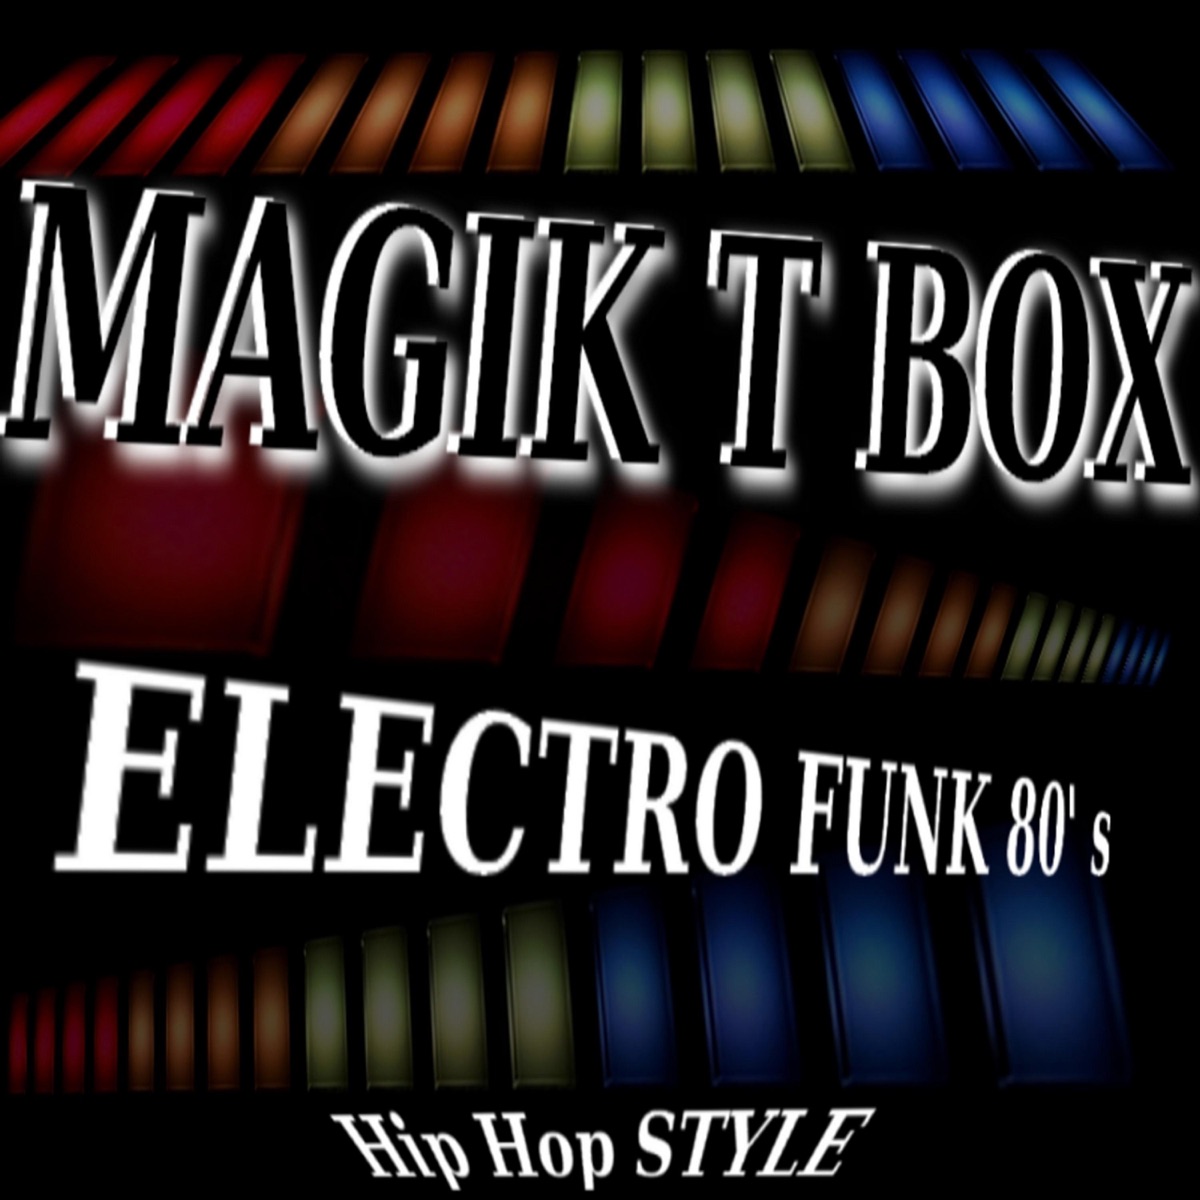 Electro Funk 80's (Hip Hop Style) by Magik T Box on Apple Music